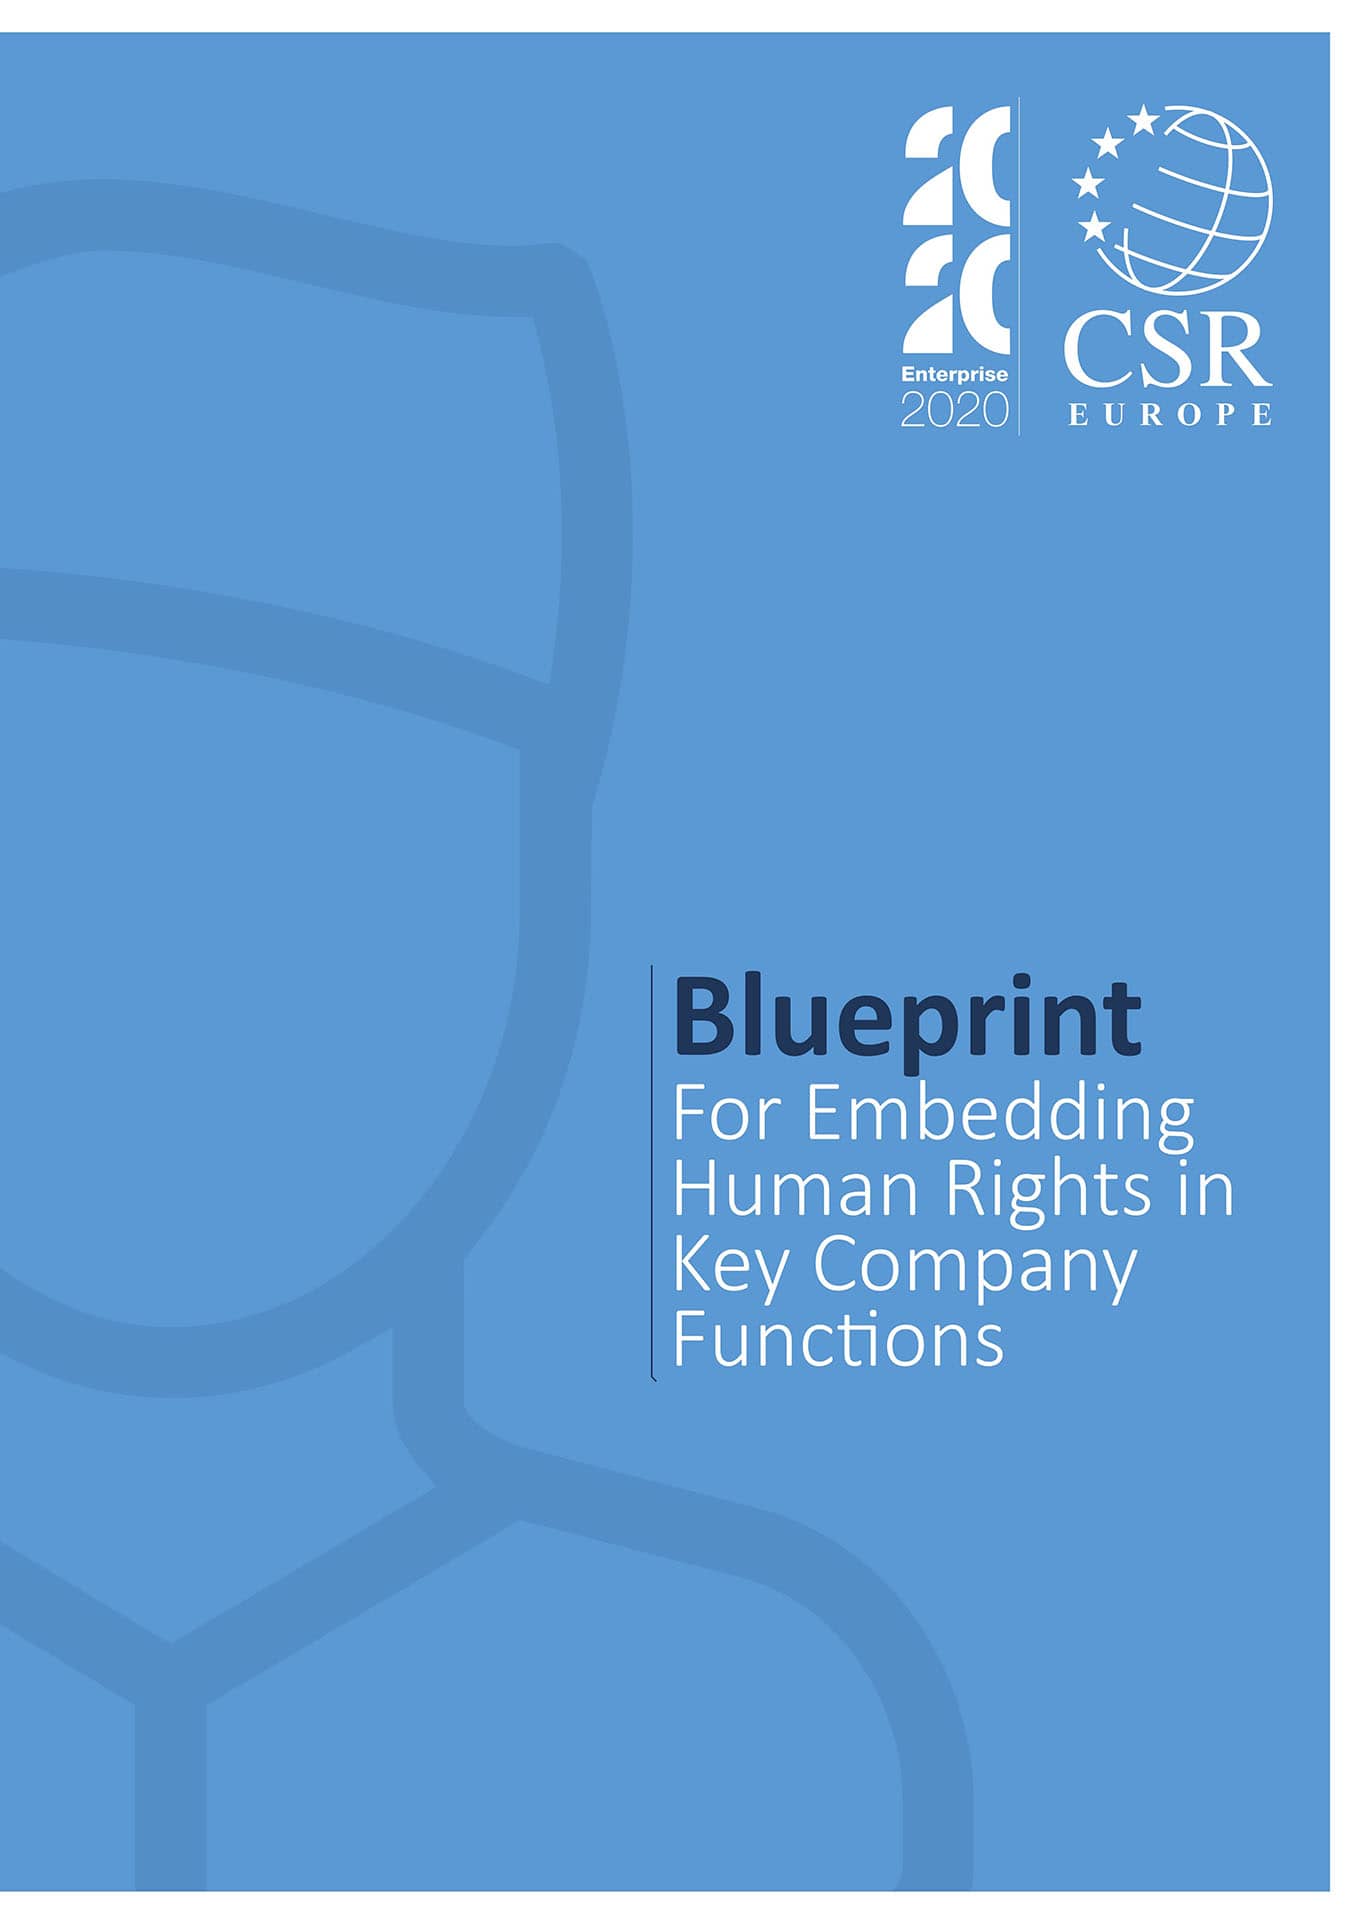 Blueprint for Embedding Human Rights in Key Company Functions (CSR Europe, 2016)